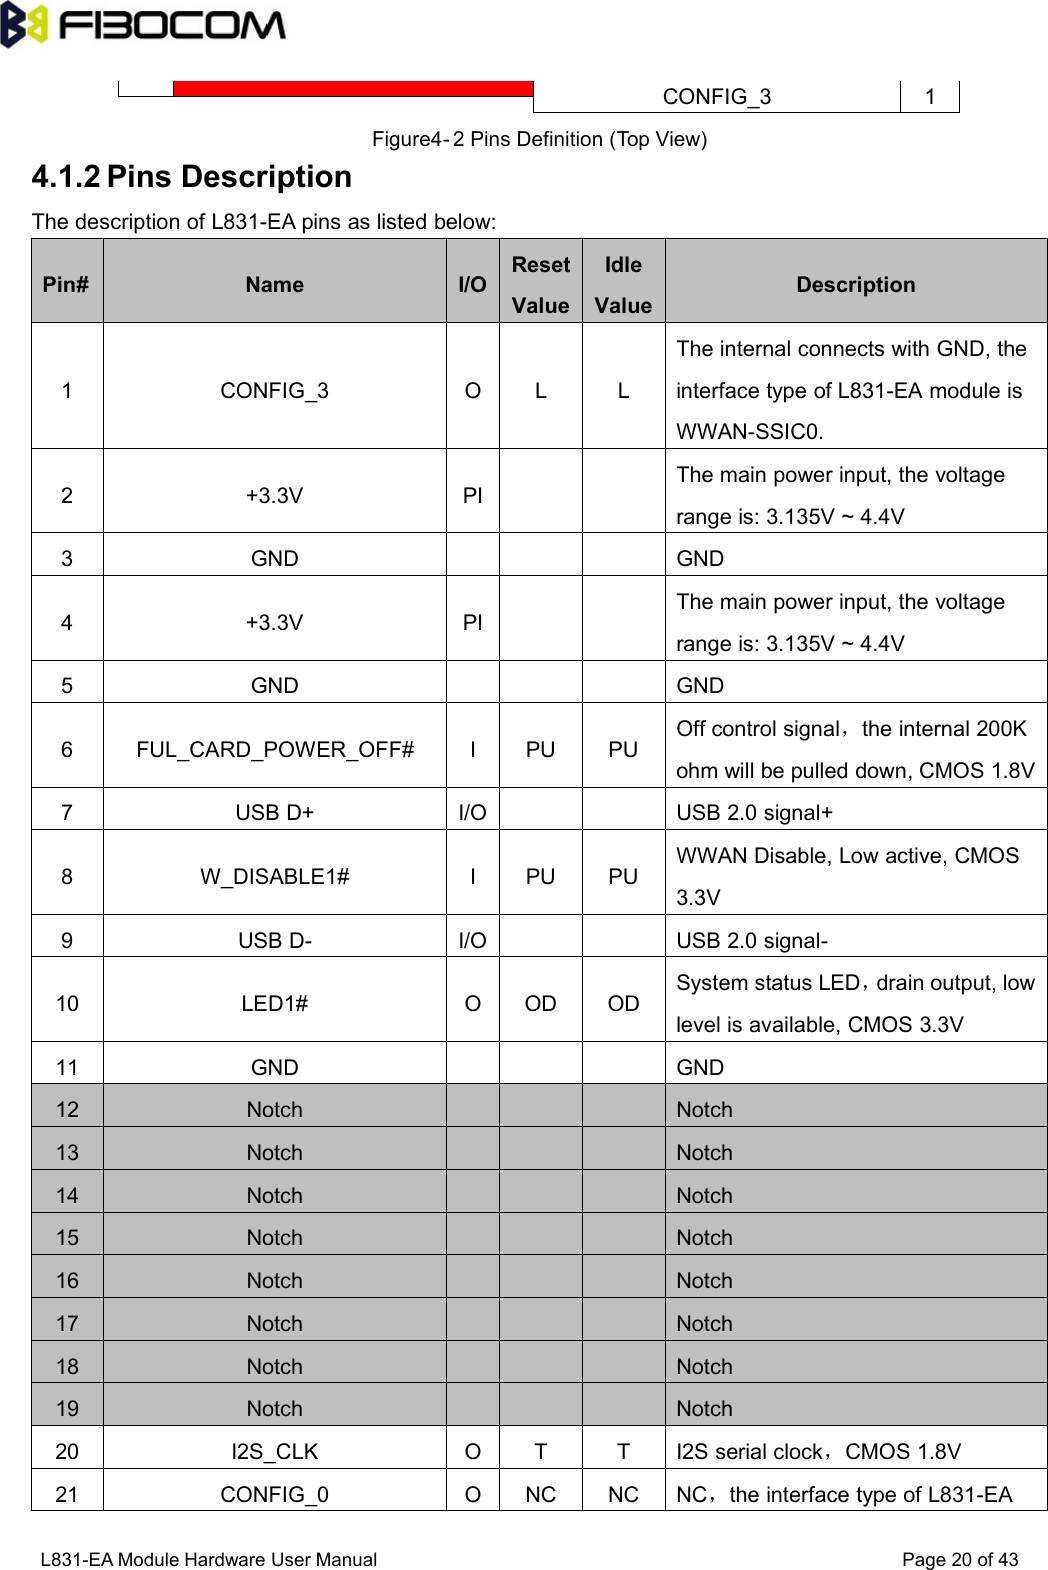 L831-EA Module Hardware User Manual Page20of43CONFIG_31Figure4- 2 Pins Definition (Top View)4.1.2 Pins DescriptionThe description of L831-EA pins as listed below:Pin#NameI/OResetValueIdleValueDescription1CONFIG_3OLLThe internal connects with GND, theinterface type of L831-EA module isWWAN-SSIC0.2+3.3VPIThe main power input, the voltagerange is: 3.135V ~ 4.4V3GNDGND4+3.3VPIThe main power input, the voltagerange is: 3.135V ~ 4.4V5GNDGND6FUL_CARD_POWER_OFF#IPUPUOff control signal，the internal 200Kohm will be pulled down, CMOS 1.8V7USB D+I/OUSB 2.0 signal+8W_DISABLE1#IPUPUWWAN Disable, Low active, CMOS3.3V9USB D-I/OUSB 2.0 signal-10LED1#OODODSystem status LED，drain output, lowlevel is available, CMOS 3.3V11GNDGND12NotchNotch13NotchNotch14NotchNotch15NotchNotch16NotchNotch17NotchNotch18NotchNotch19NotchNotch20I2S_CLKOTTI2S serial clock，CMOS 1.8V21CONFIG_0ONCNCNC，the interface type of L831-EA